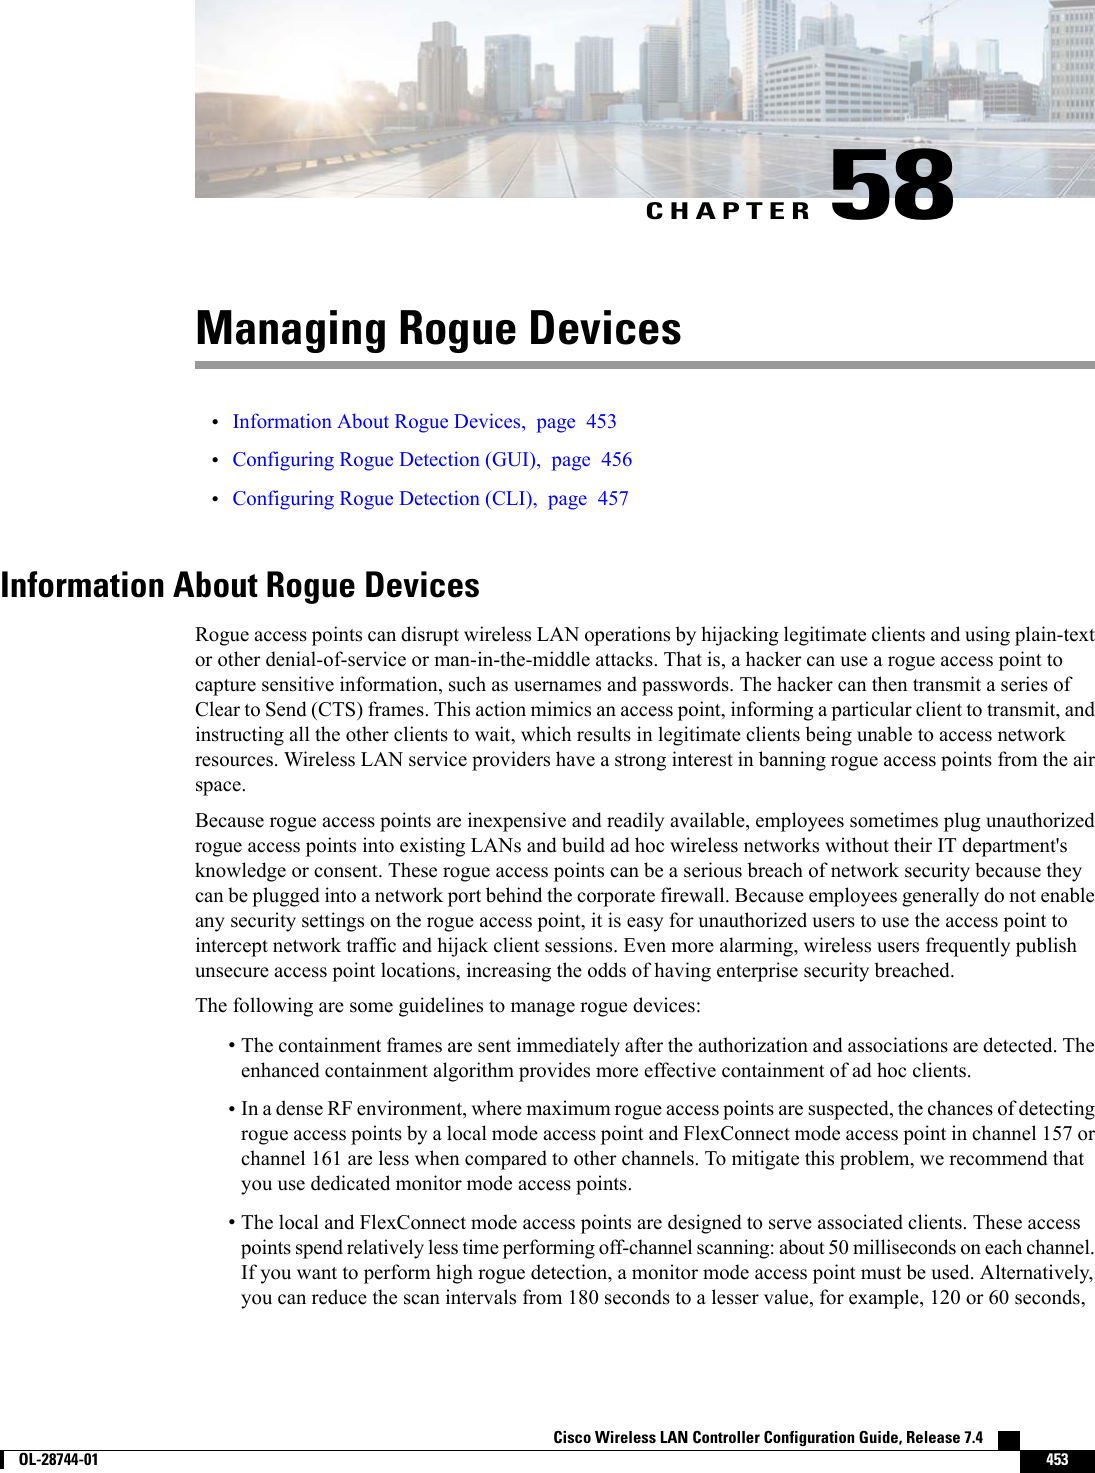 CHAPTER 58Managing Rogue Devices•Information About Rogue Devices, page 453•Configuring Rogue Detection (GUI), page 456•Configuring Rogue Detection (CLI), page 457Information About Rogue DevicesRogue access points can disrupt wireless LAN operations by hijacking legitimate clients and using plain-textor other denial-of-service or man-in-the-middle attacks. That is, a hacker can use a rogue access point tocapture sensitive information, such as usernames and passwords. The hacker can then transmit a series ofClear to Send (CTS) frames. This action mimics an access point, informing a particular client to transmit, andinstructing all the other clients to wait, which results in legitimate clients being unable to access networkresources. Wireless LAN service providers have a strong interest in banning rogue access points from the airspace.Because rogue access points are inexpensive and readily available, employees sometimes plug unauthorizedrogue access points into existing LANs and build ad hoc wireless networks without their IT department&apos;sknowledge or consent. These rogue access points can be a serious breach of network security because theycan be plugged into a network port behind the corporate firewall. Because employees generally do not enableany security settings on the rogue access point, it is easy for unauthorized users to use the access point tointercept network traffic and hijack client sessions. Even more alarming, wireless users frequently publishunsecure access point locations, increasing the odds of having enterprise security breached.The following are some guidelines to manage rogue devices:•The containment frames are sent immediately after the authorization and associations are detected. Theenhanced containment algorithm provides more effective containment of ad hoc clients.•In a dense RF environment, where maximum rogue access points are suspected, the chances of detectingrogue access points by a local mode access point and FlexConnect mode access point in channel 157 orchannel 161 are less when compared to other channels. To mitigate this problem, we recommend thatyou use dedicated monitor mode access points.•The local and FlexConnect mode access points are designed to serve associated clients. These accesspoints spend relatively less time performing off-channel scanning: about 50 milliseconds on each channel.If you want to perform high rogue detection, a monitor mode access point must be used. Alternatively,you can reduce the scan intervals from 180 seconds to a lesser value, for example, 120 or 60 seconds,Cisco Wireless LAN Controller Configuration Guide, Release 7.4        OL-28744-01 453